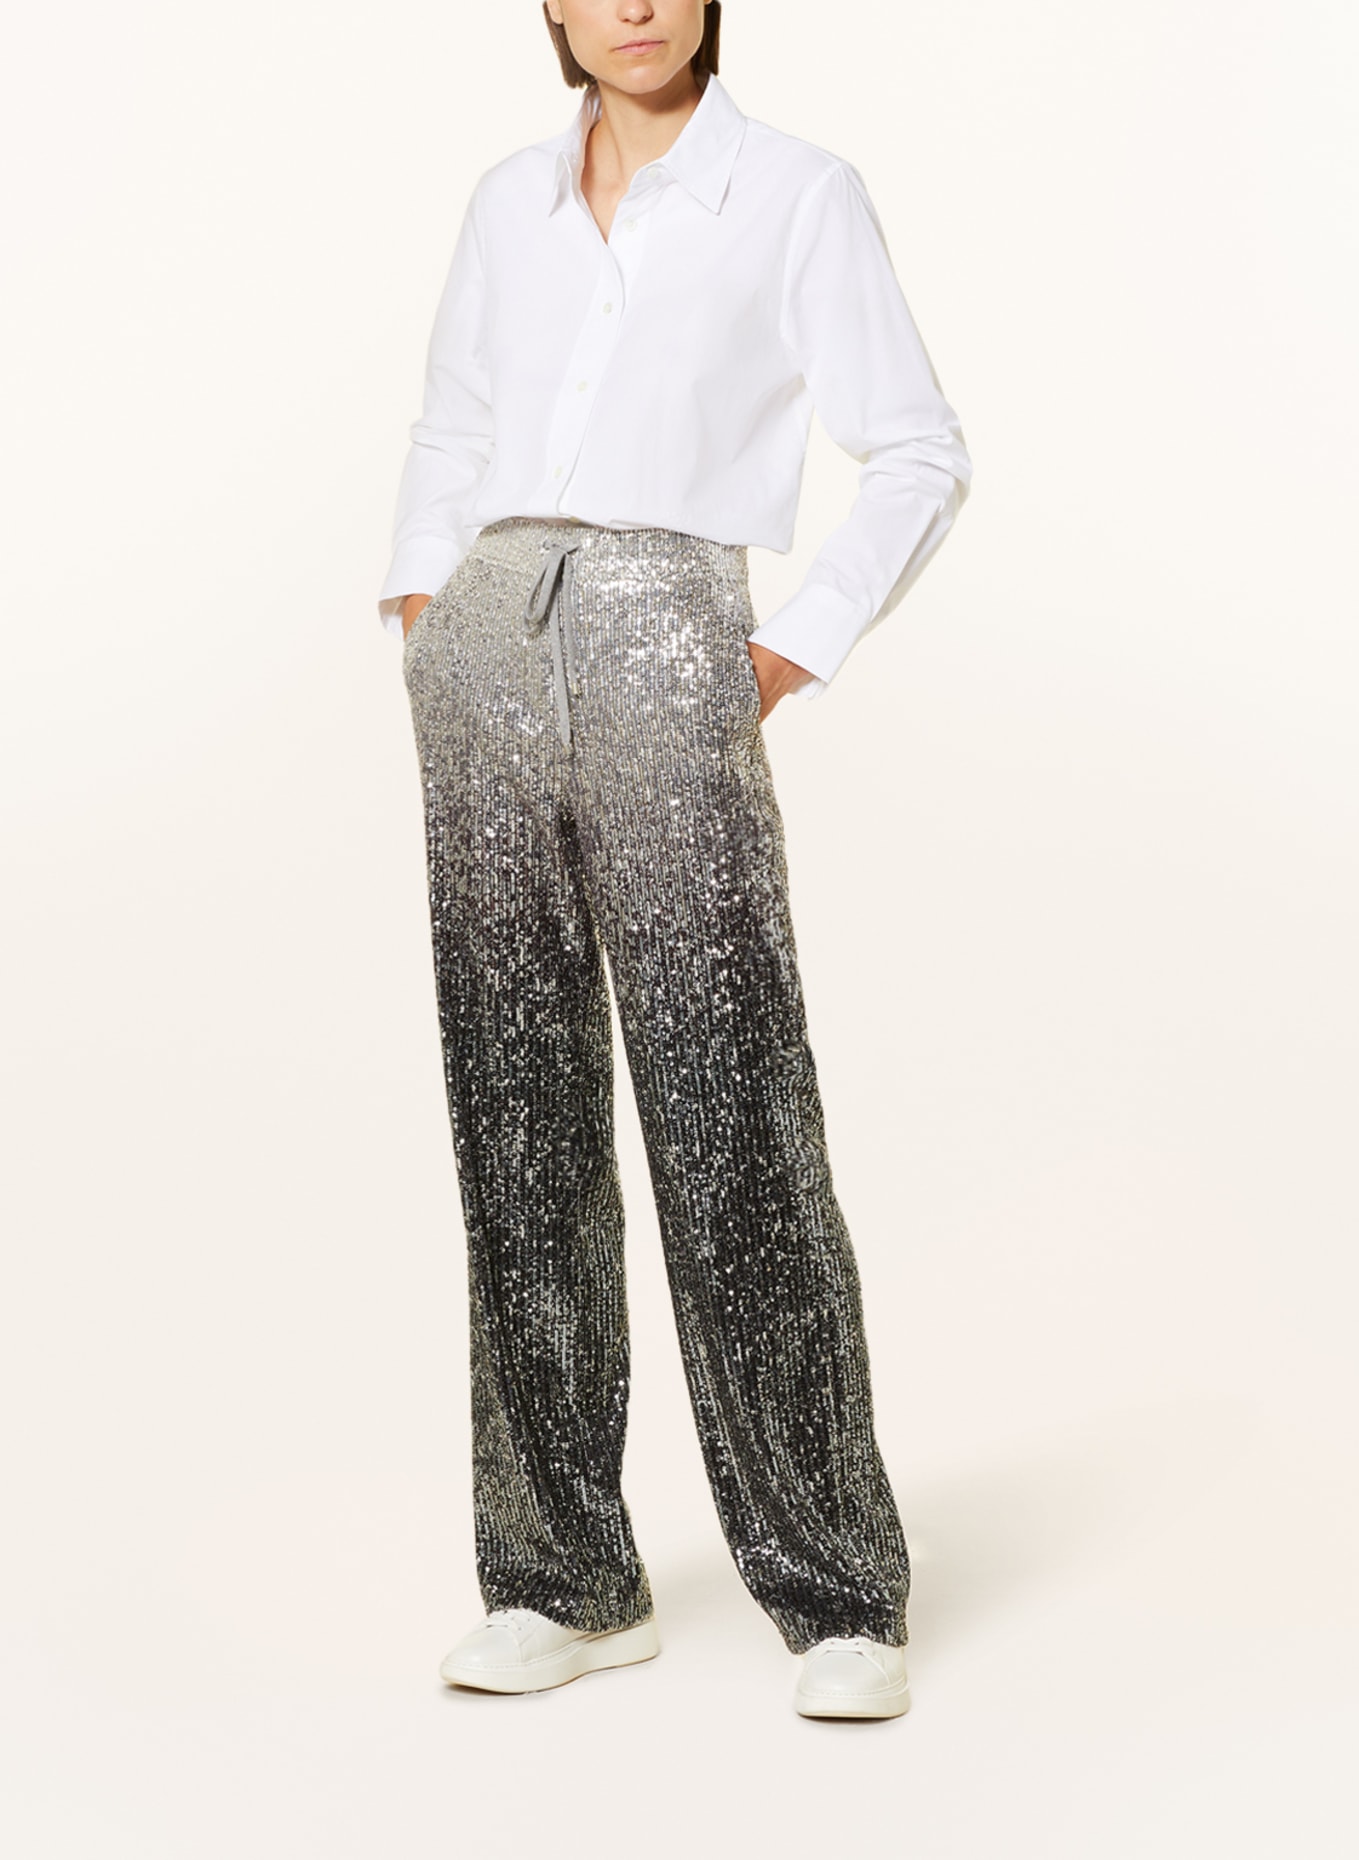 CAMBIO Trousers AVRIL with sequins, Color: GRAY/ BLACK/ SILVER (Image 2)